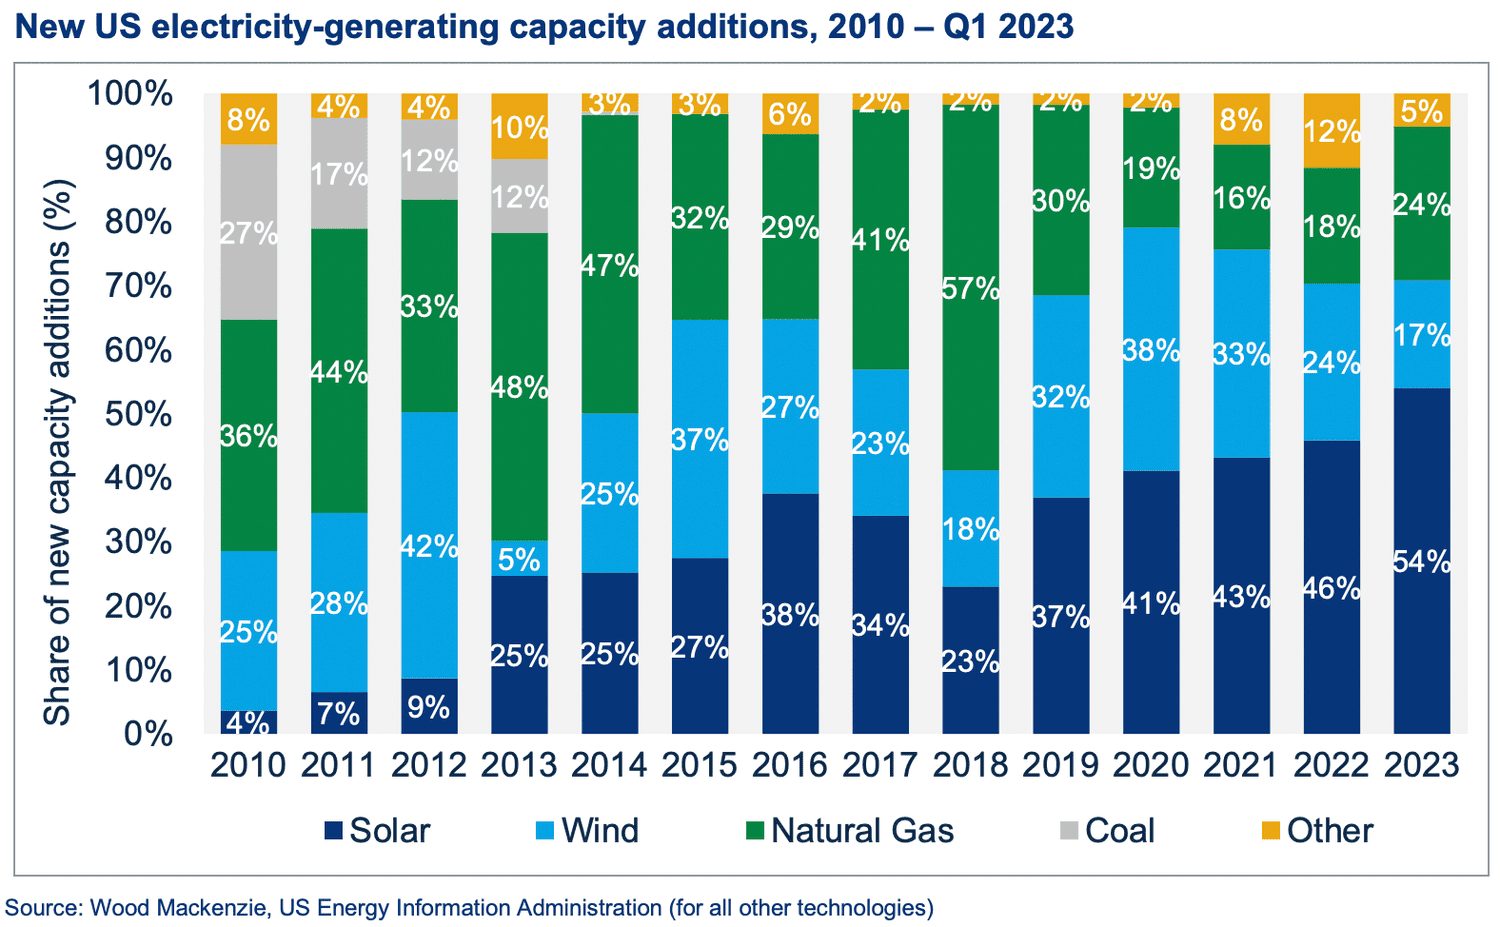 New US electricity-generating capacity additions, 2010-Q1 2023